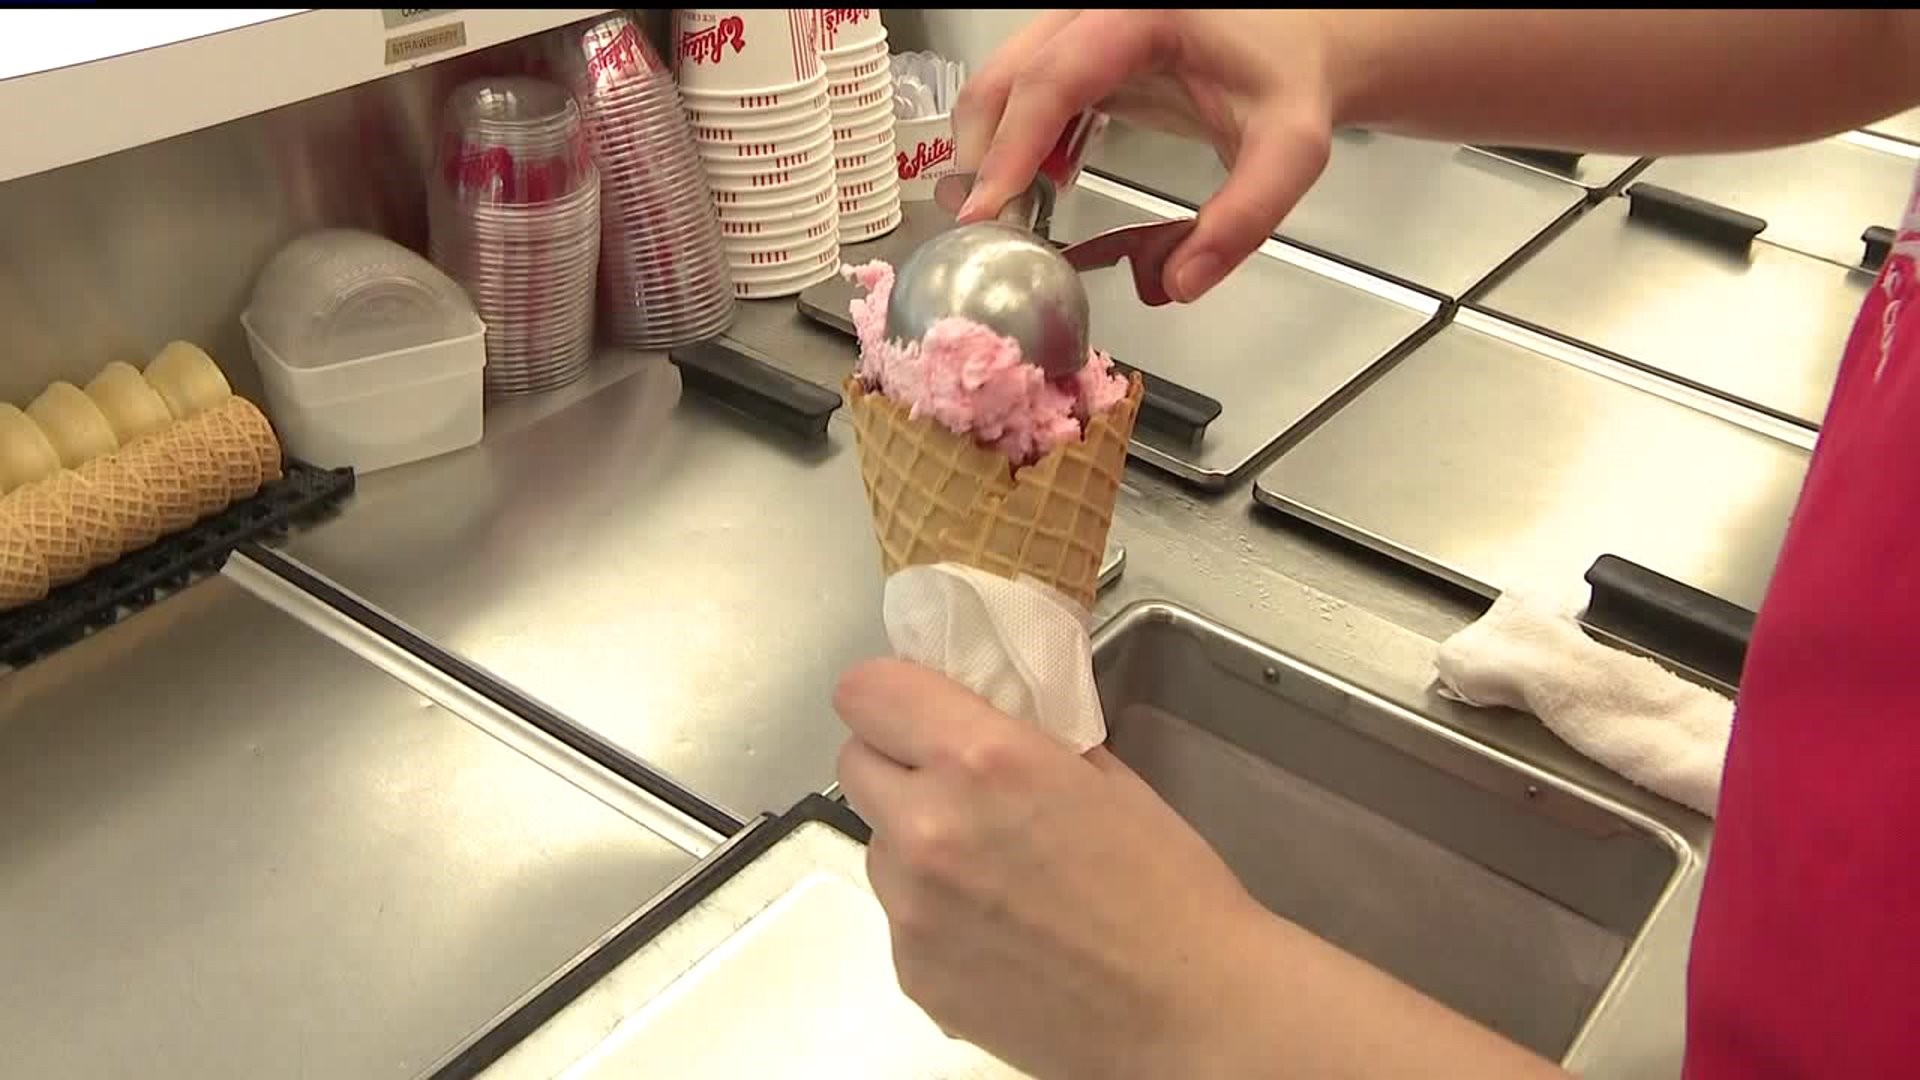 How getting an ice cream cone can help kids